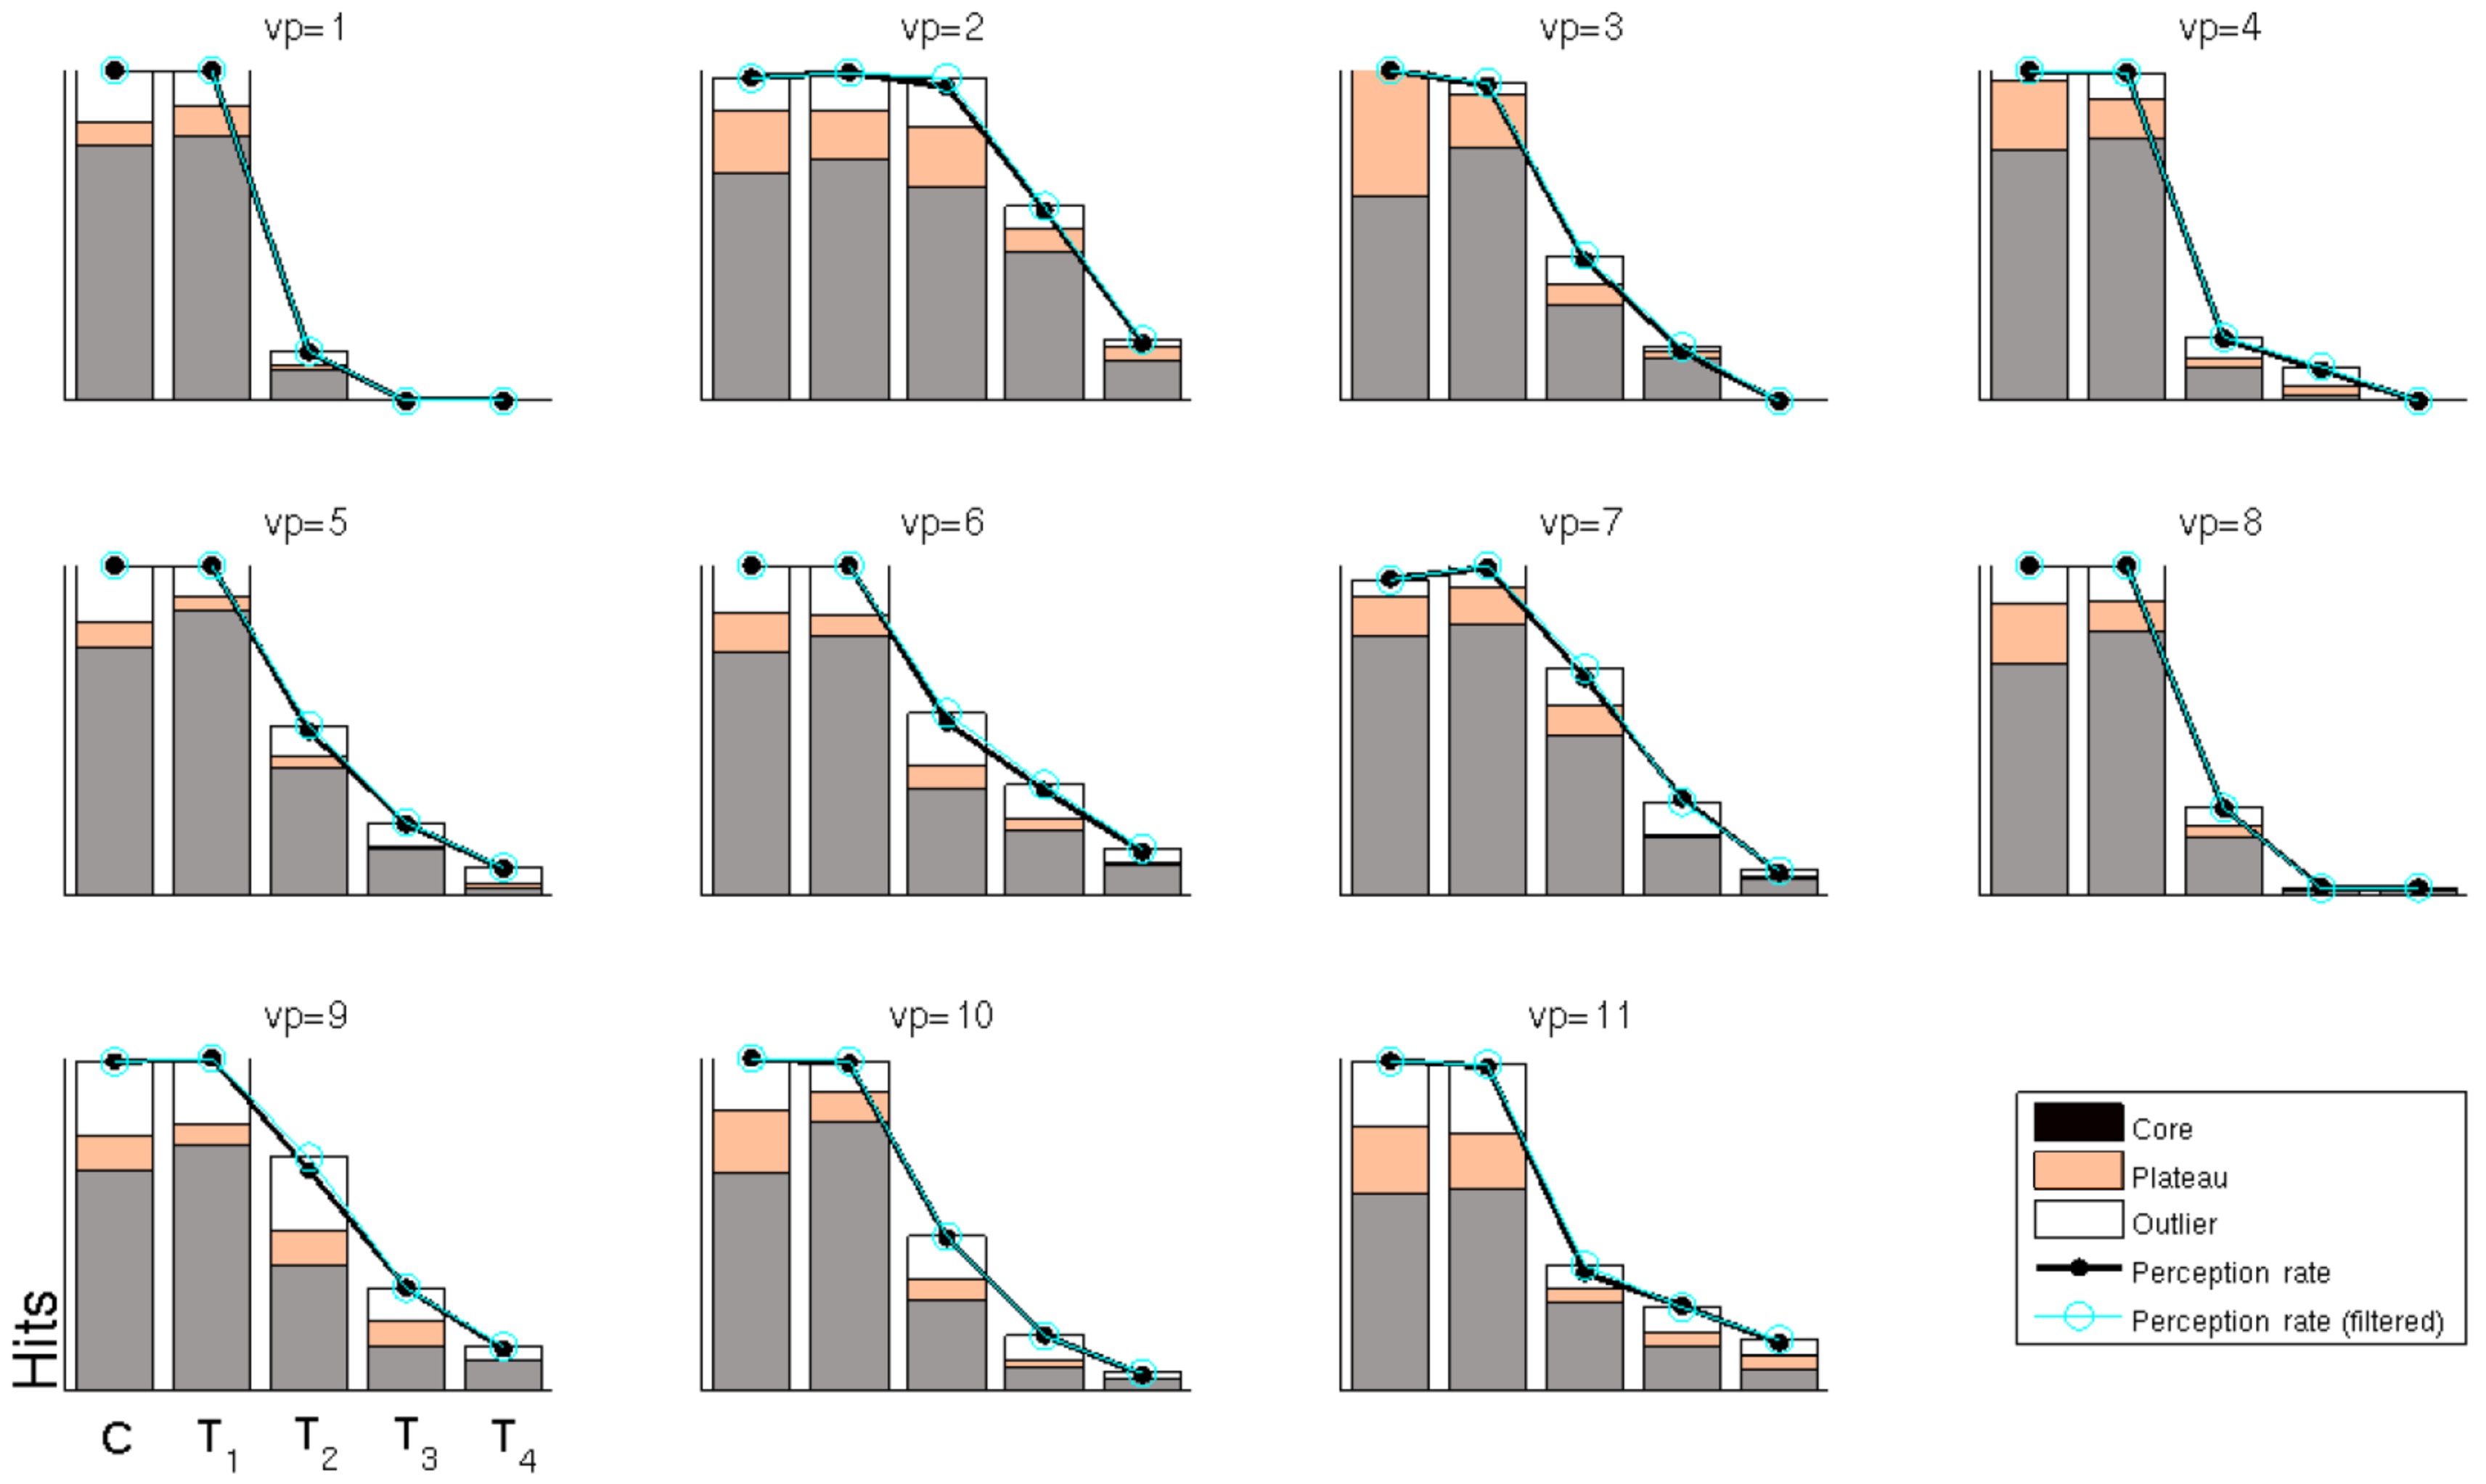 Behavioral perception rate for all participants and target stimuli (C, T1？T4 from left to right), with the ratio of how many of these trials are grouped into core, plateau and outlier class (gray, orange, and white box).